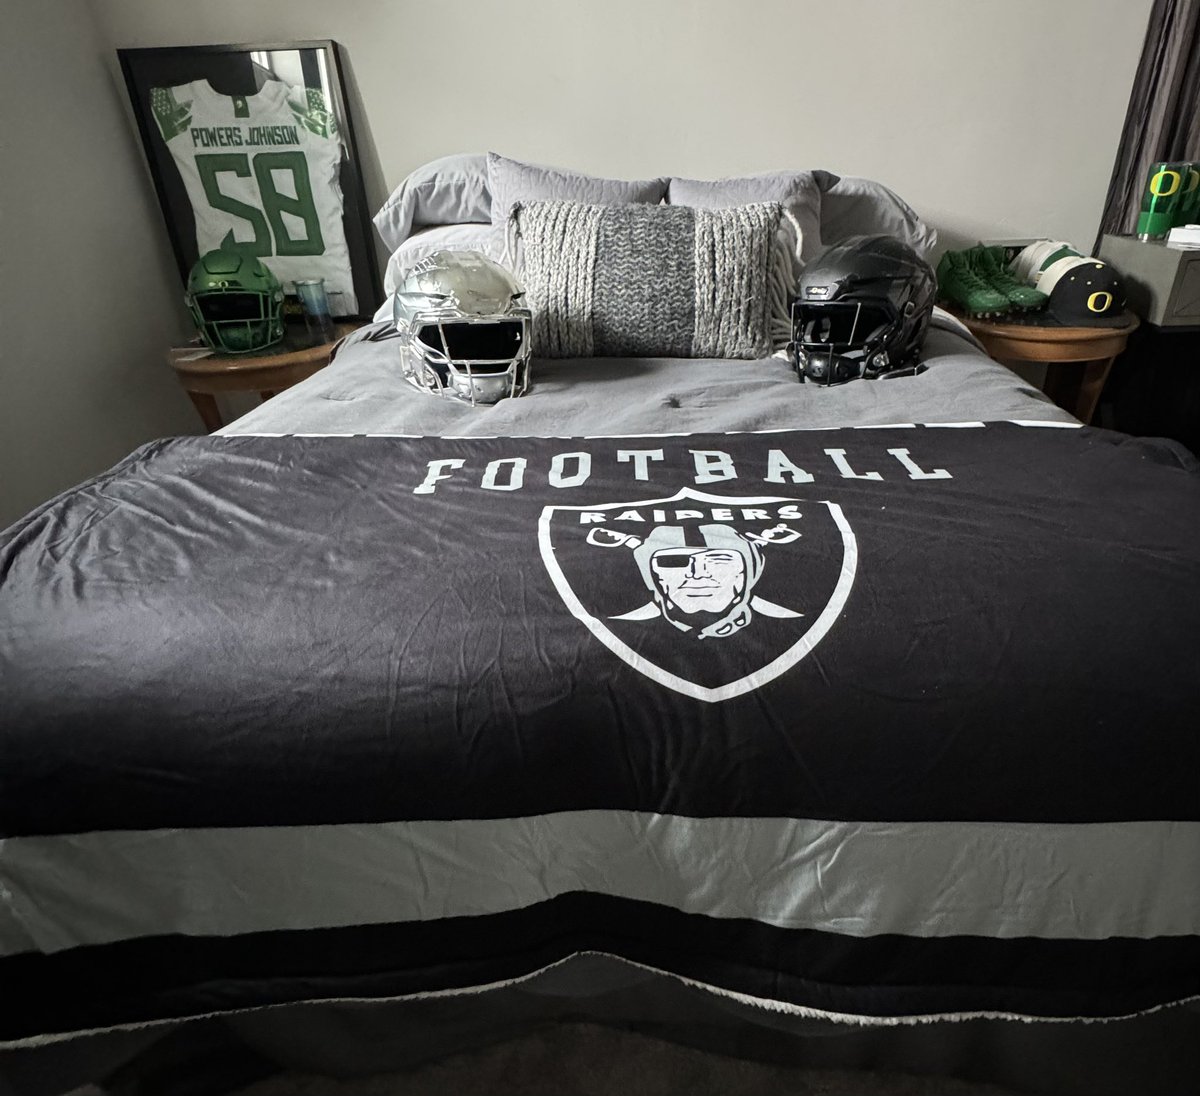 When he was a kid he would sleep with his new equipment like some kids sleep with a new toy & dream of playing pro ball. All grown up and packing up to head to camp next week. Could not be happier to be part of #RaiderNation 🖤🩶🤍